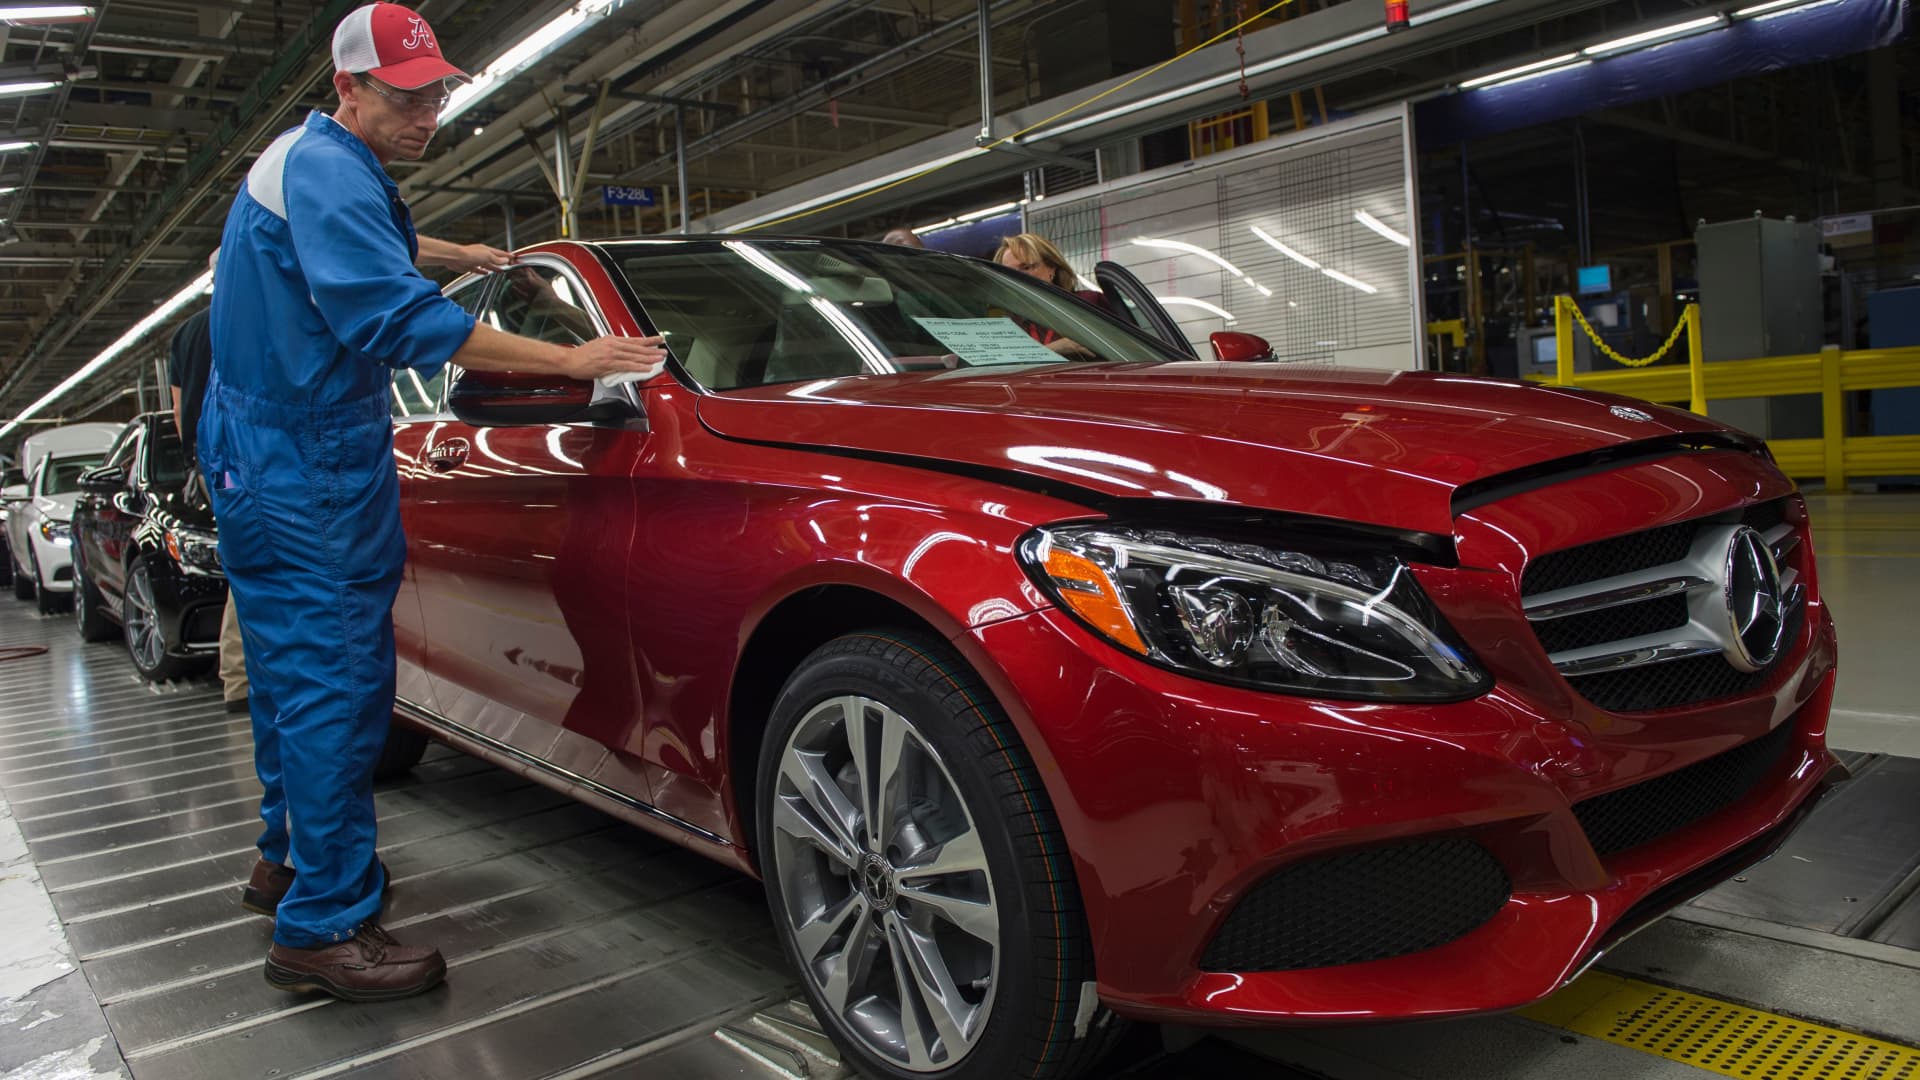 An employee does final inspections on a Mercedes-Benz C-Class at the Mercedes-Benz US International factory in Vance, Alabama on June 8, 2017.